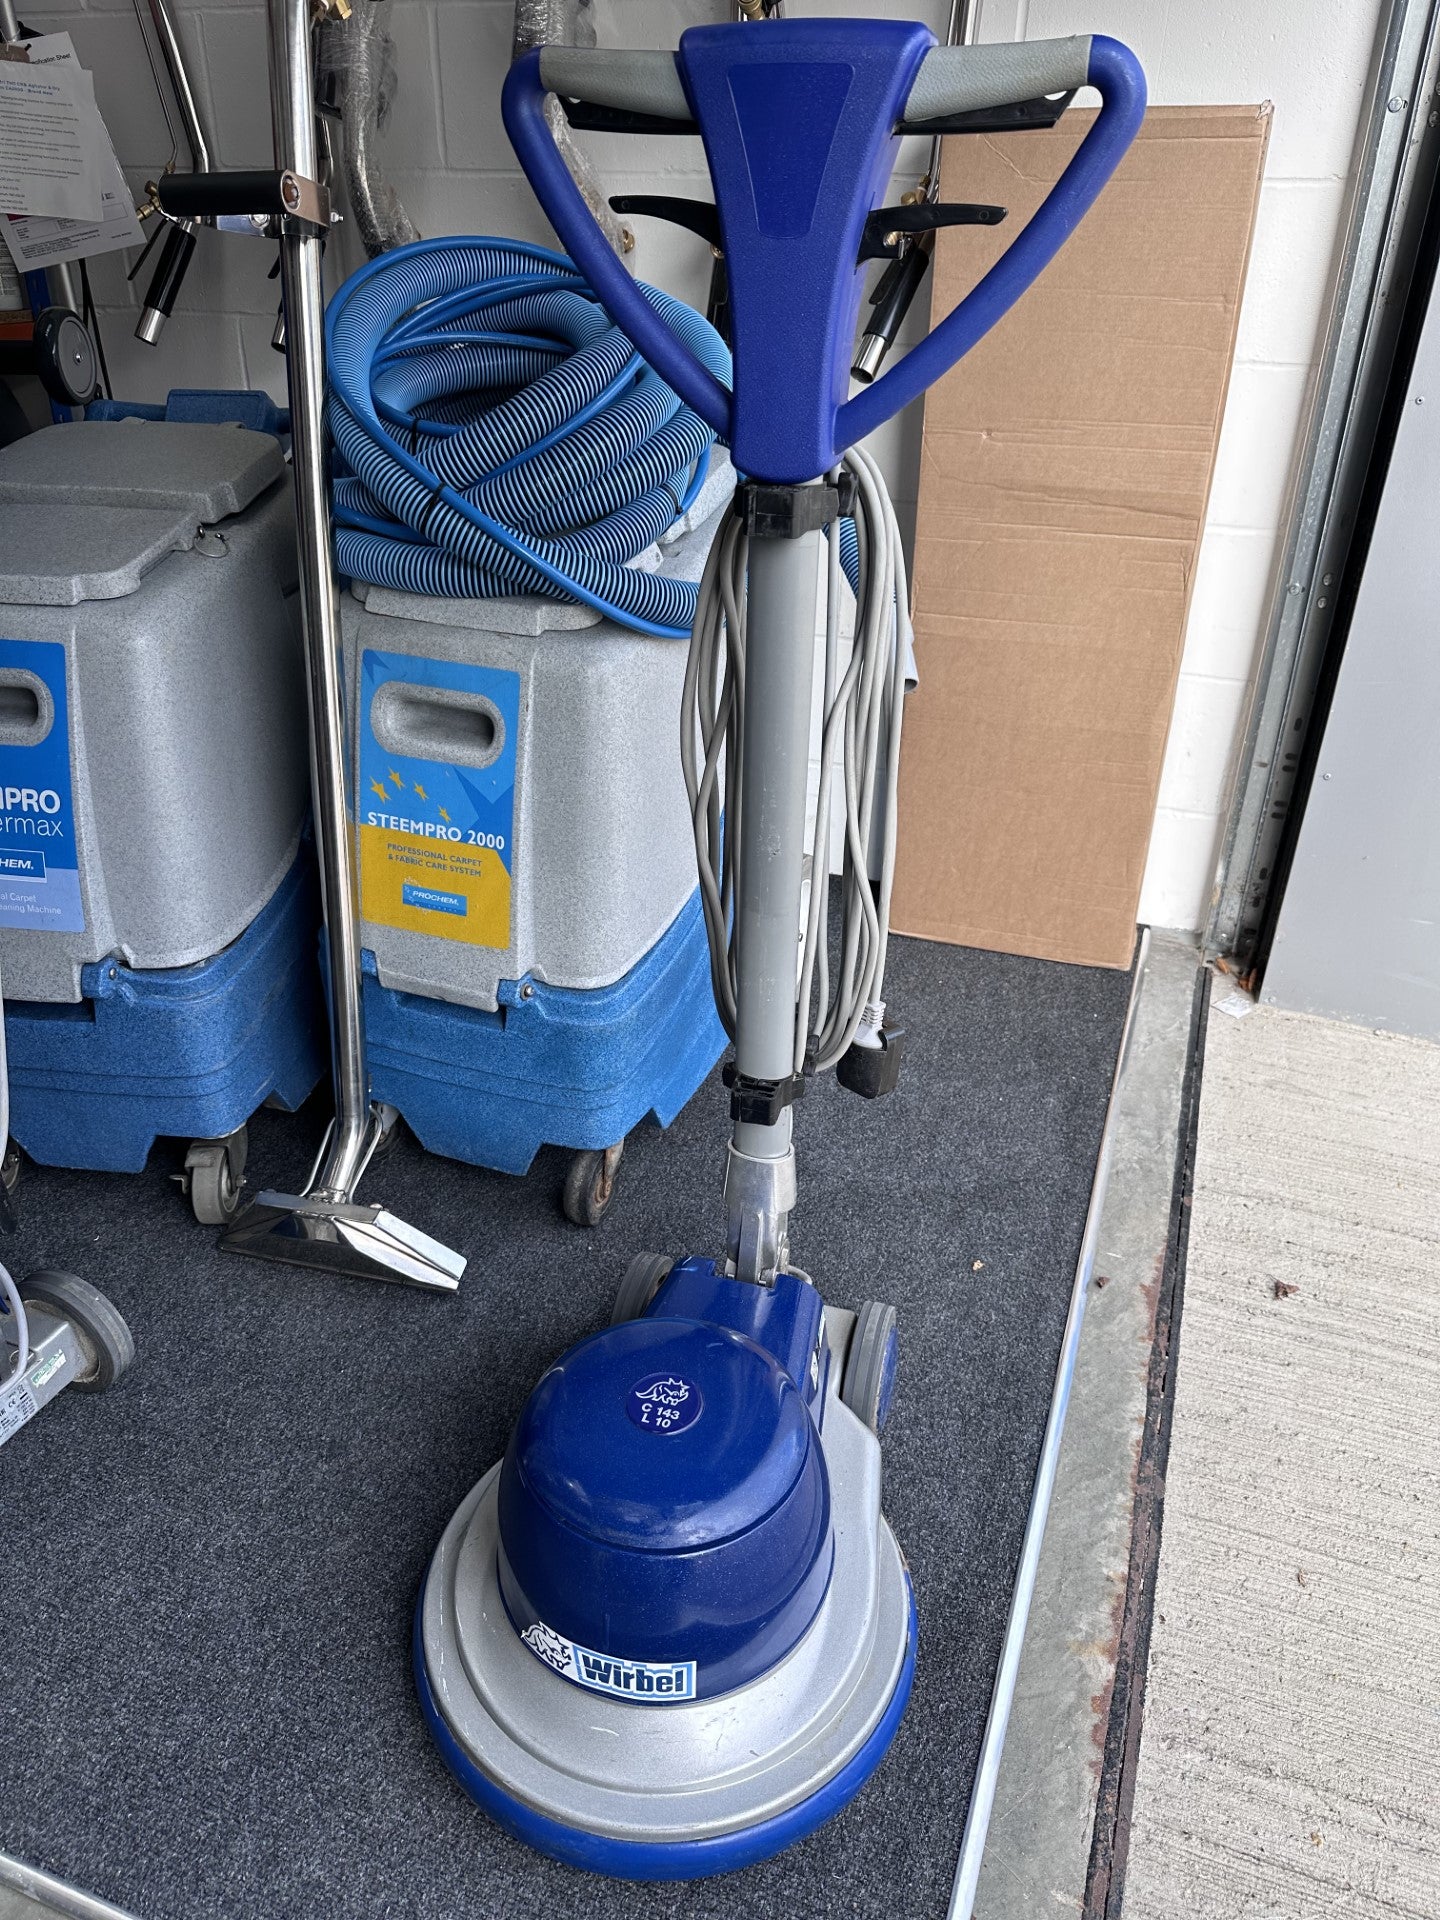 Used - Wirbel GH3140 Floor Pro L10 Low Speed Rotary Carpet & Floor Cleaning Machine